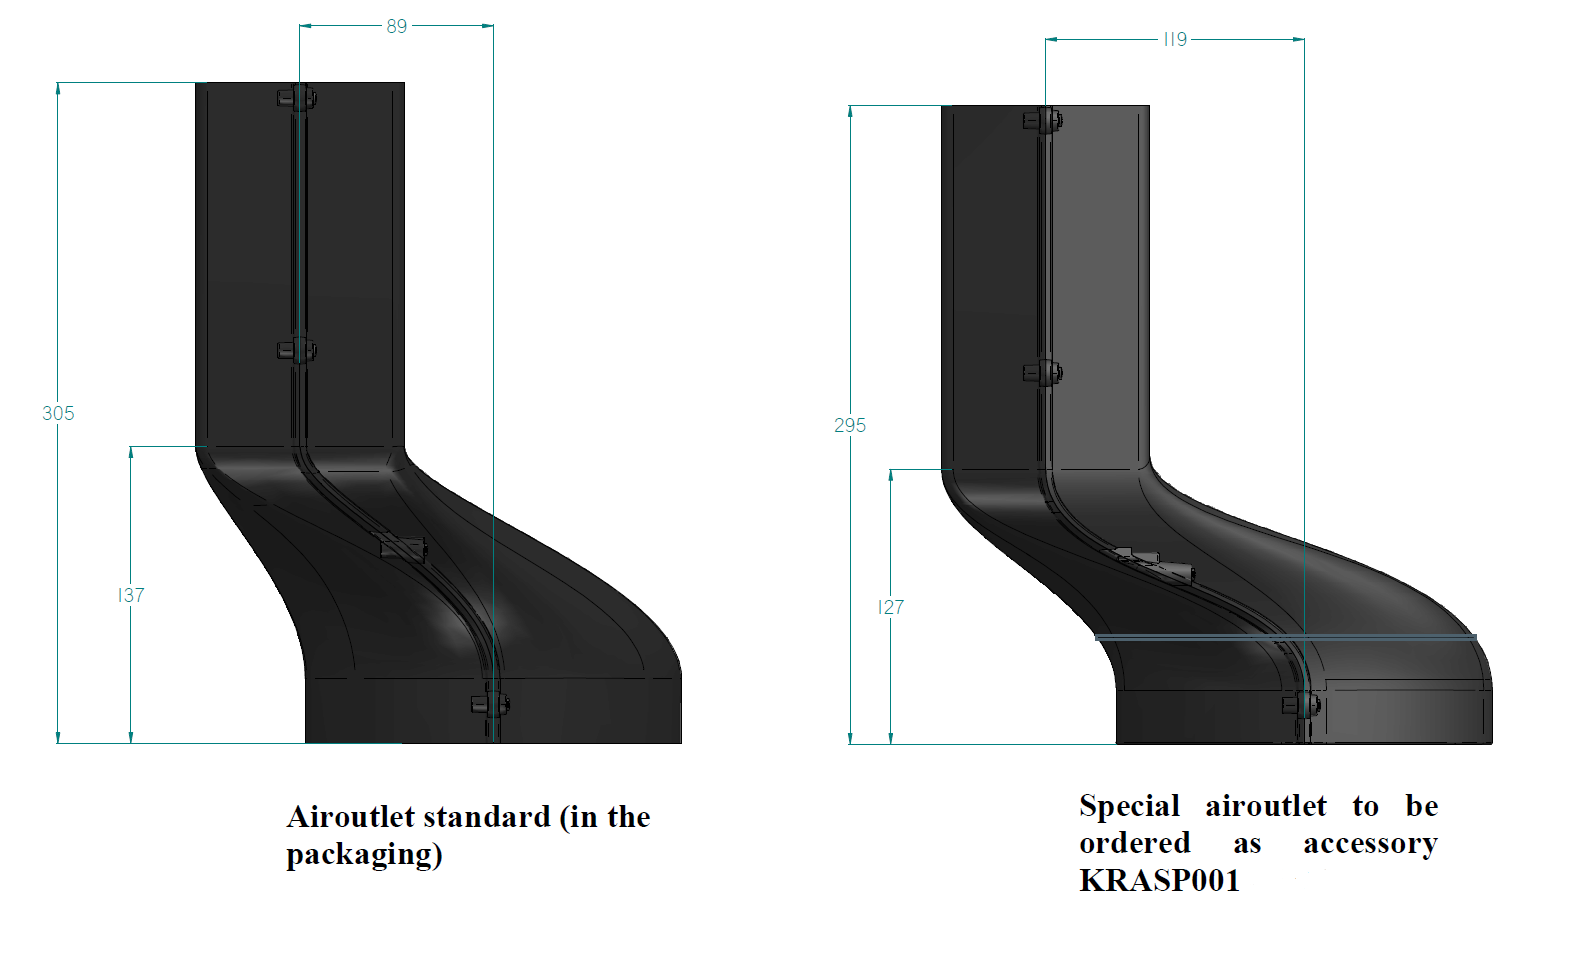 Airforce KRASP001 Air outlet modification for Aspira Slim Downdraft Induction Hobs Technical Image